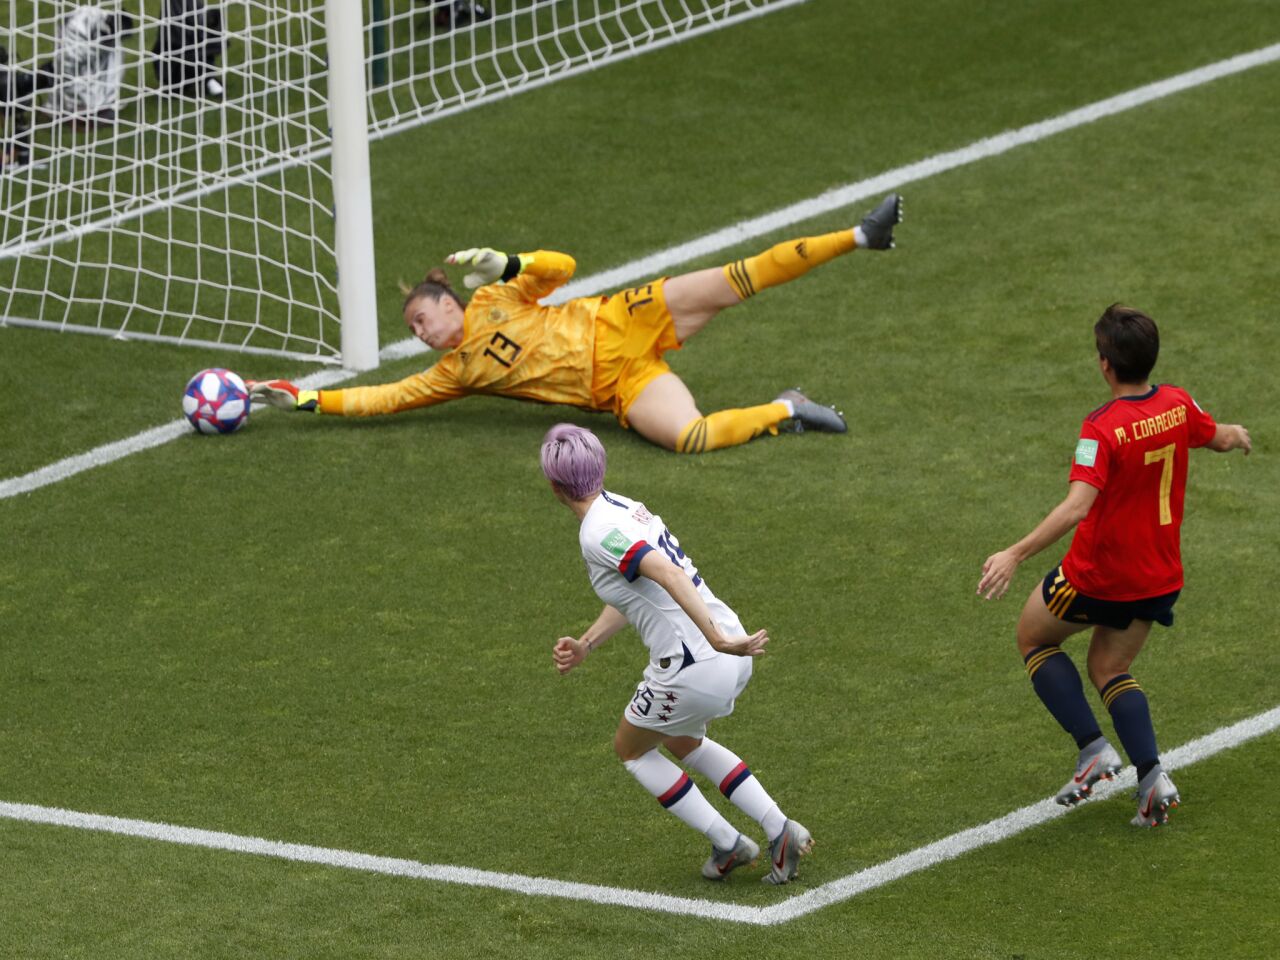 Spain goalkeeper Sandra Panos makes a save in front of Megan Rapinoe, front left, of the U.S.